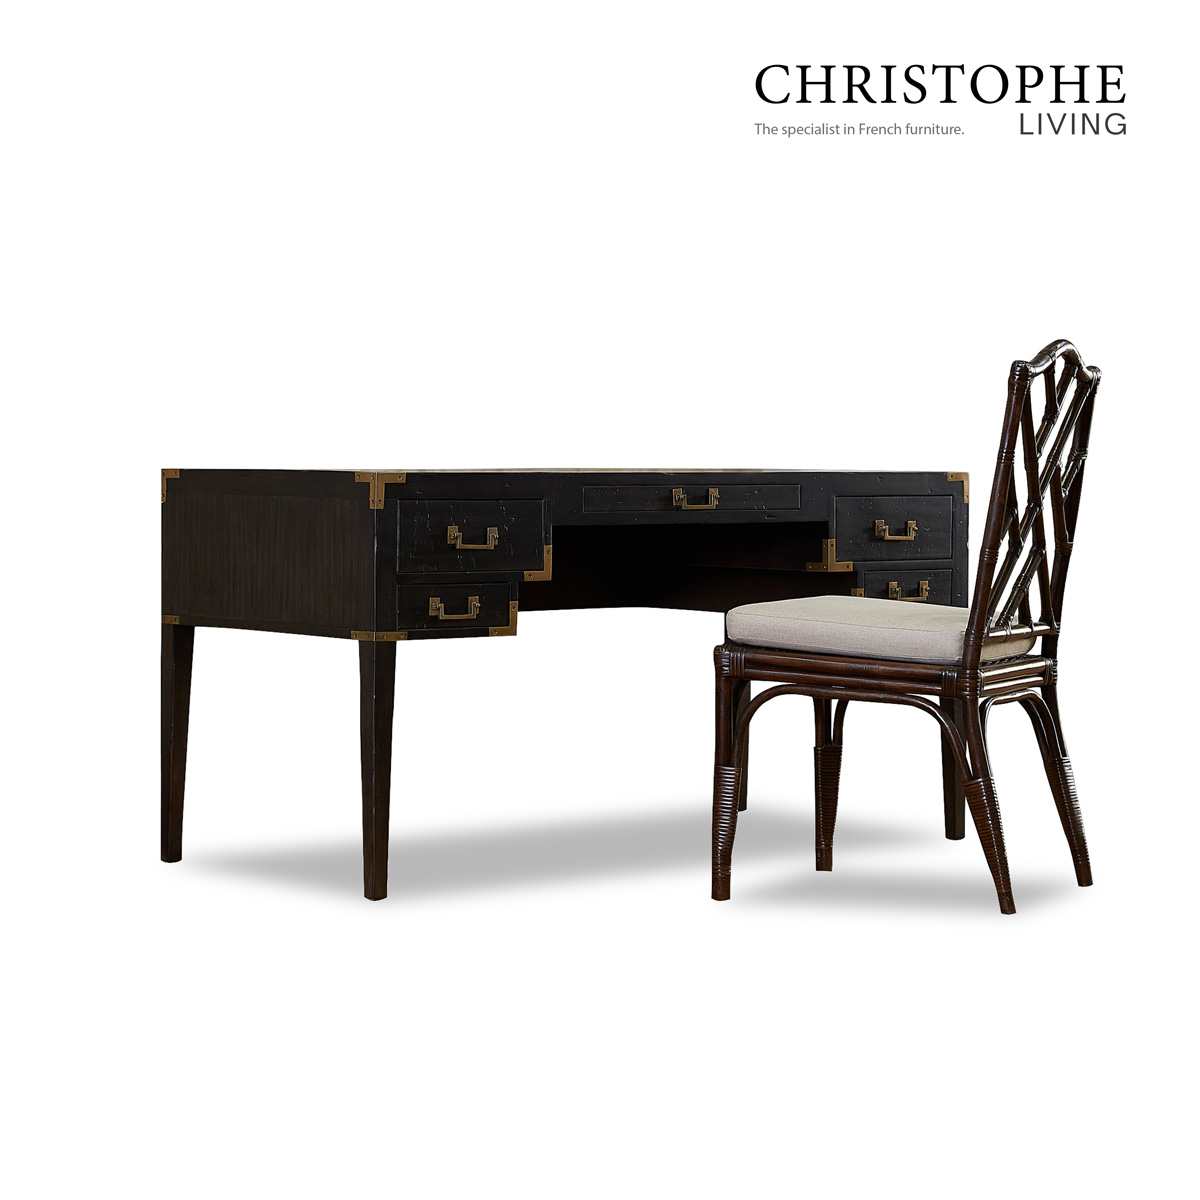 Holland Classic Study Desk in Charcoal Dark Timber with 5 Drawers and Brass Accents